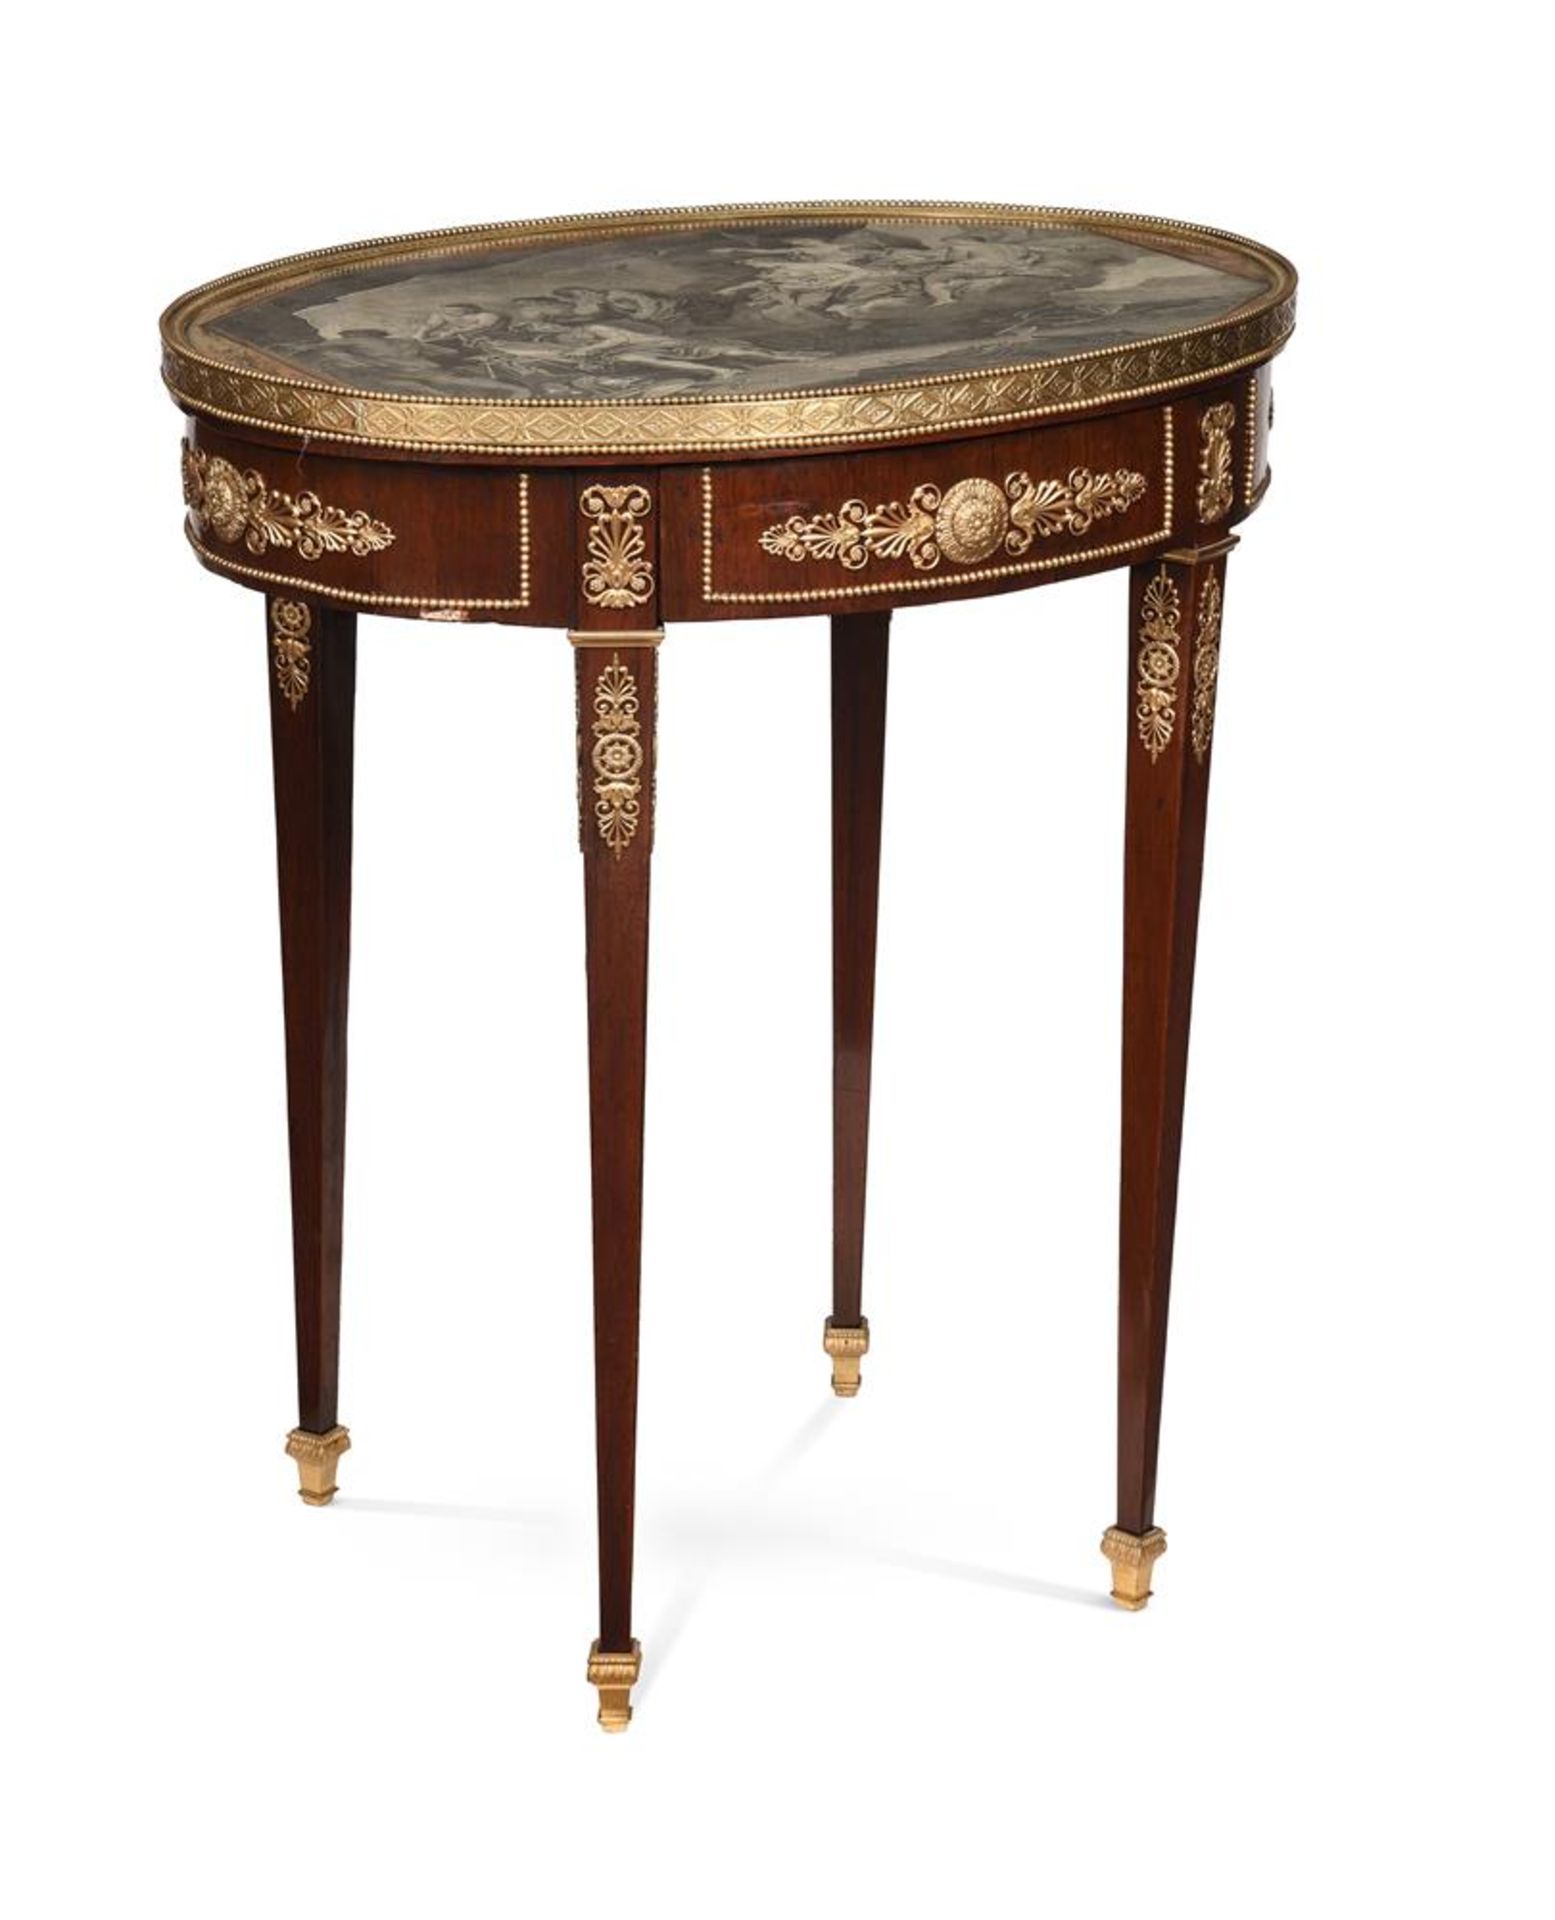 AN AUSTRIAN MAHOGANY AND GILT METAL MOUNTED OCCASIONAL TABLE, EARLY 19TH CENTURY